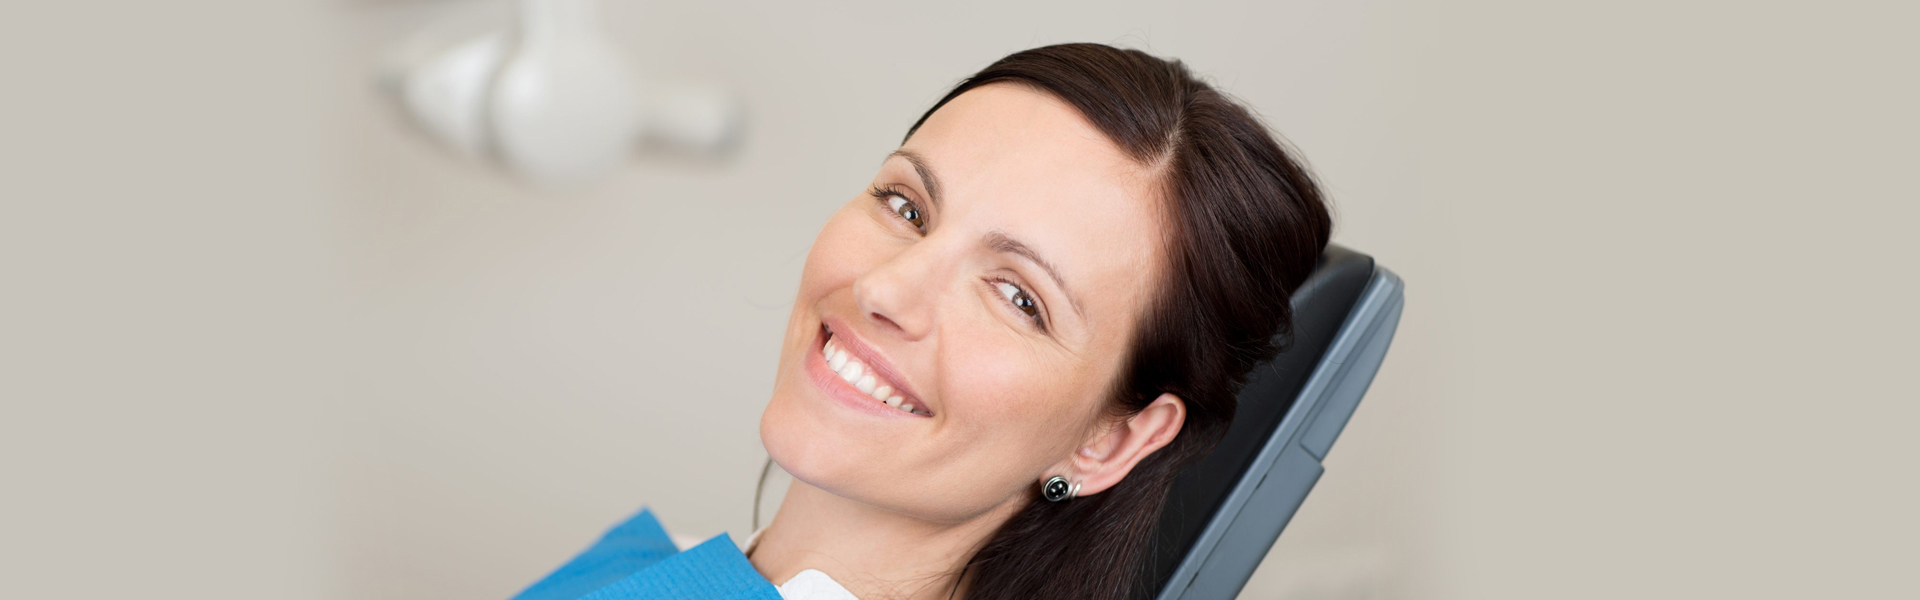 Oral Surgery Procedures and Post-Surgery Tips